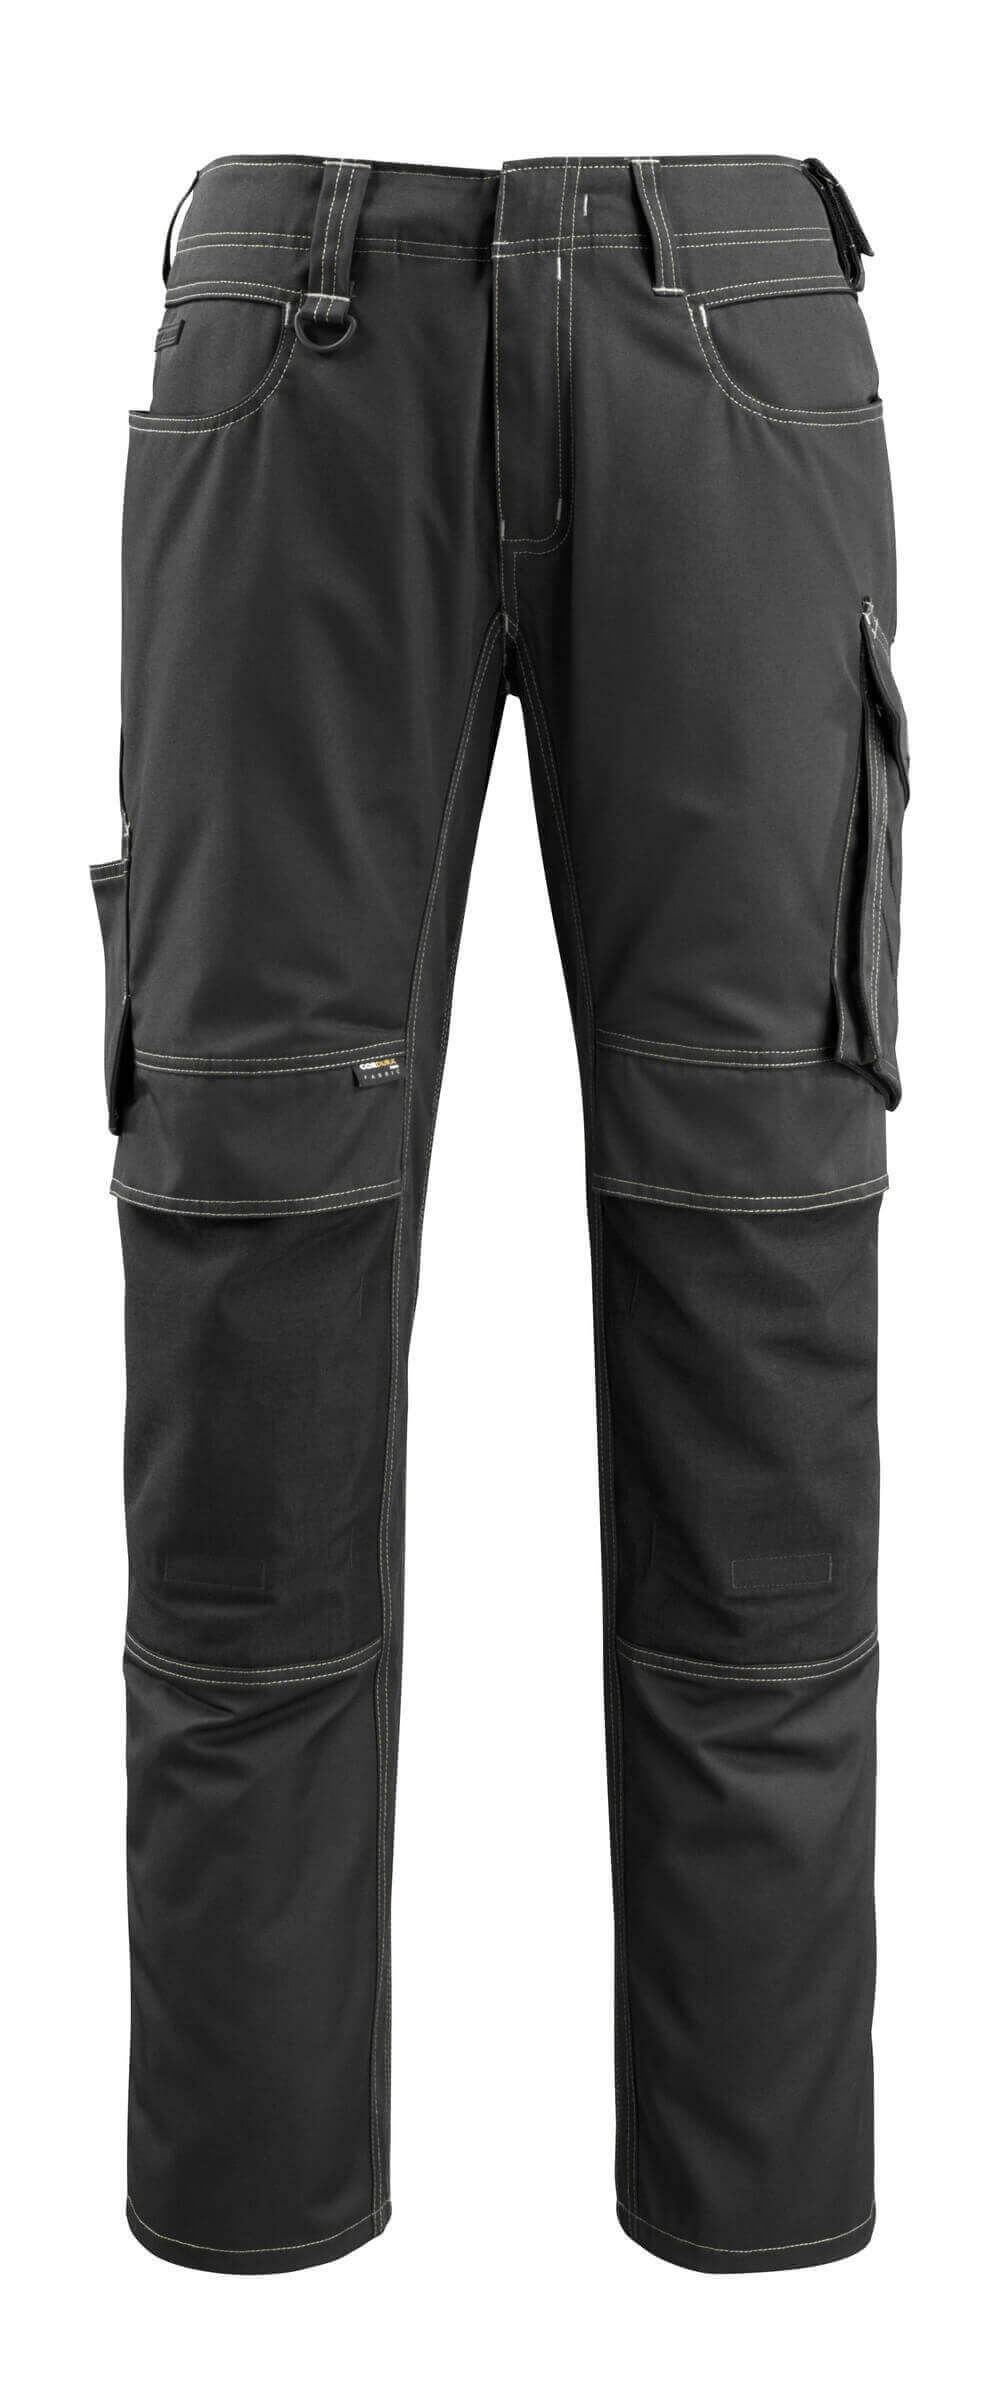 MASCOT®UNIQUE Trousers with kneepad pockets Mannheim 12779 - DaltonSafety